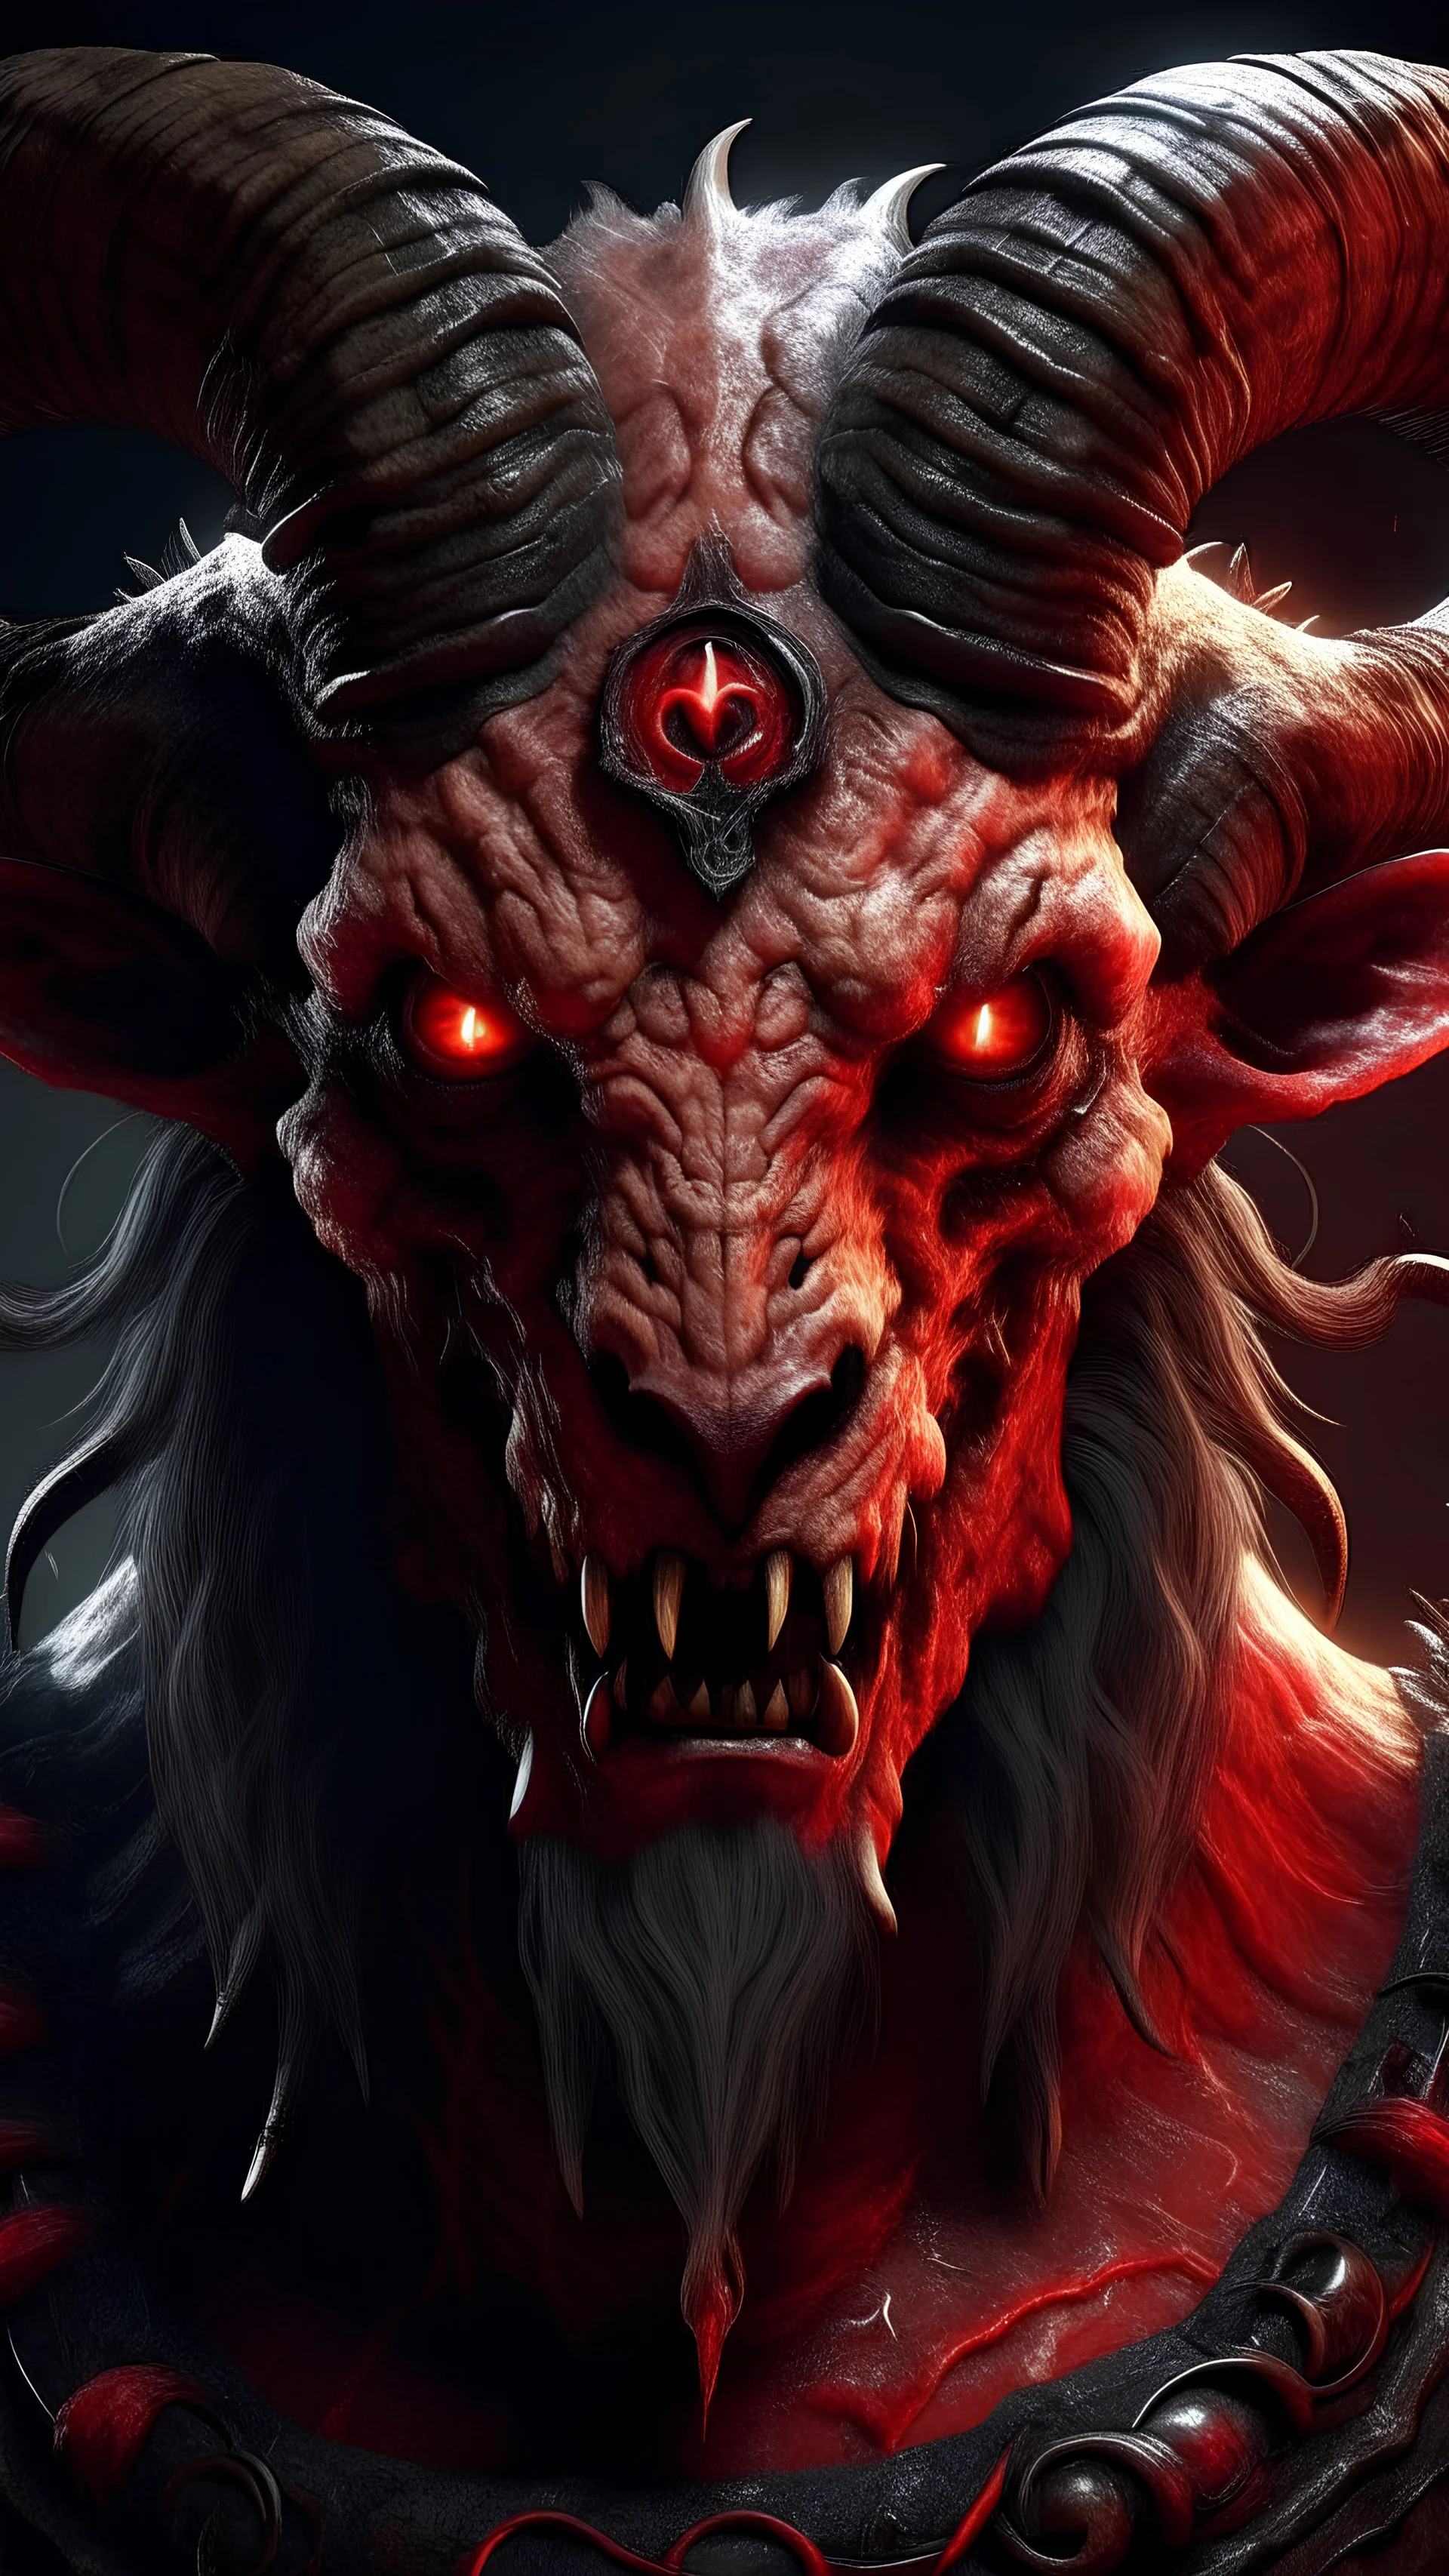 Crafting a terrifying 8K depiction of a demonic ram-man involves highlighting his eerie features: twisted horns, glowing red eyes, a snarling mouth with sharp teeth, and a scarred, fur-covered body. His presence exudes an unsettling aura of malevolence, instilling fear in all who behold him.